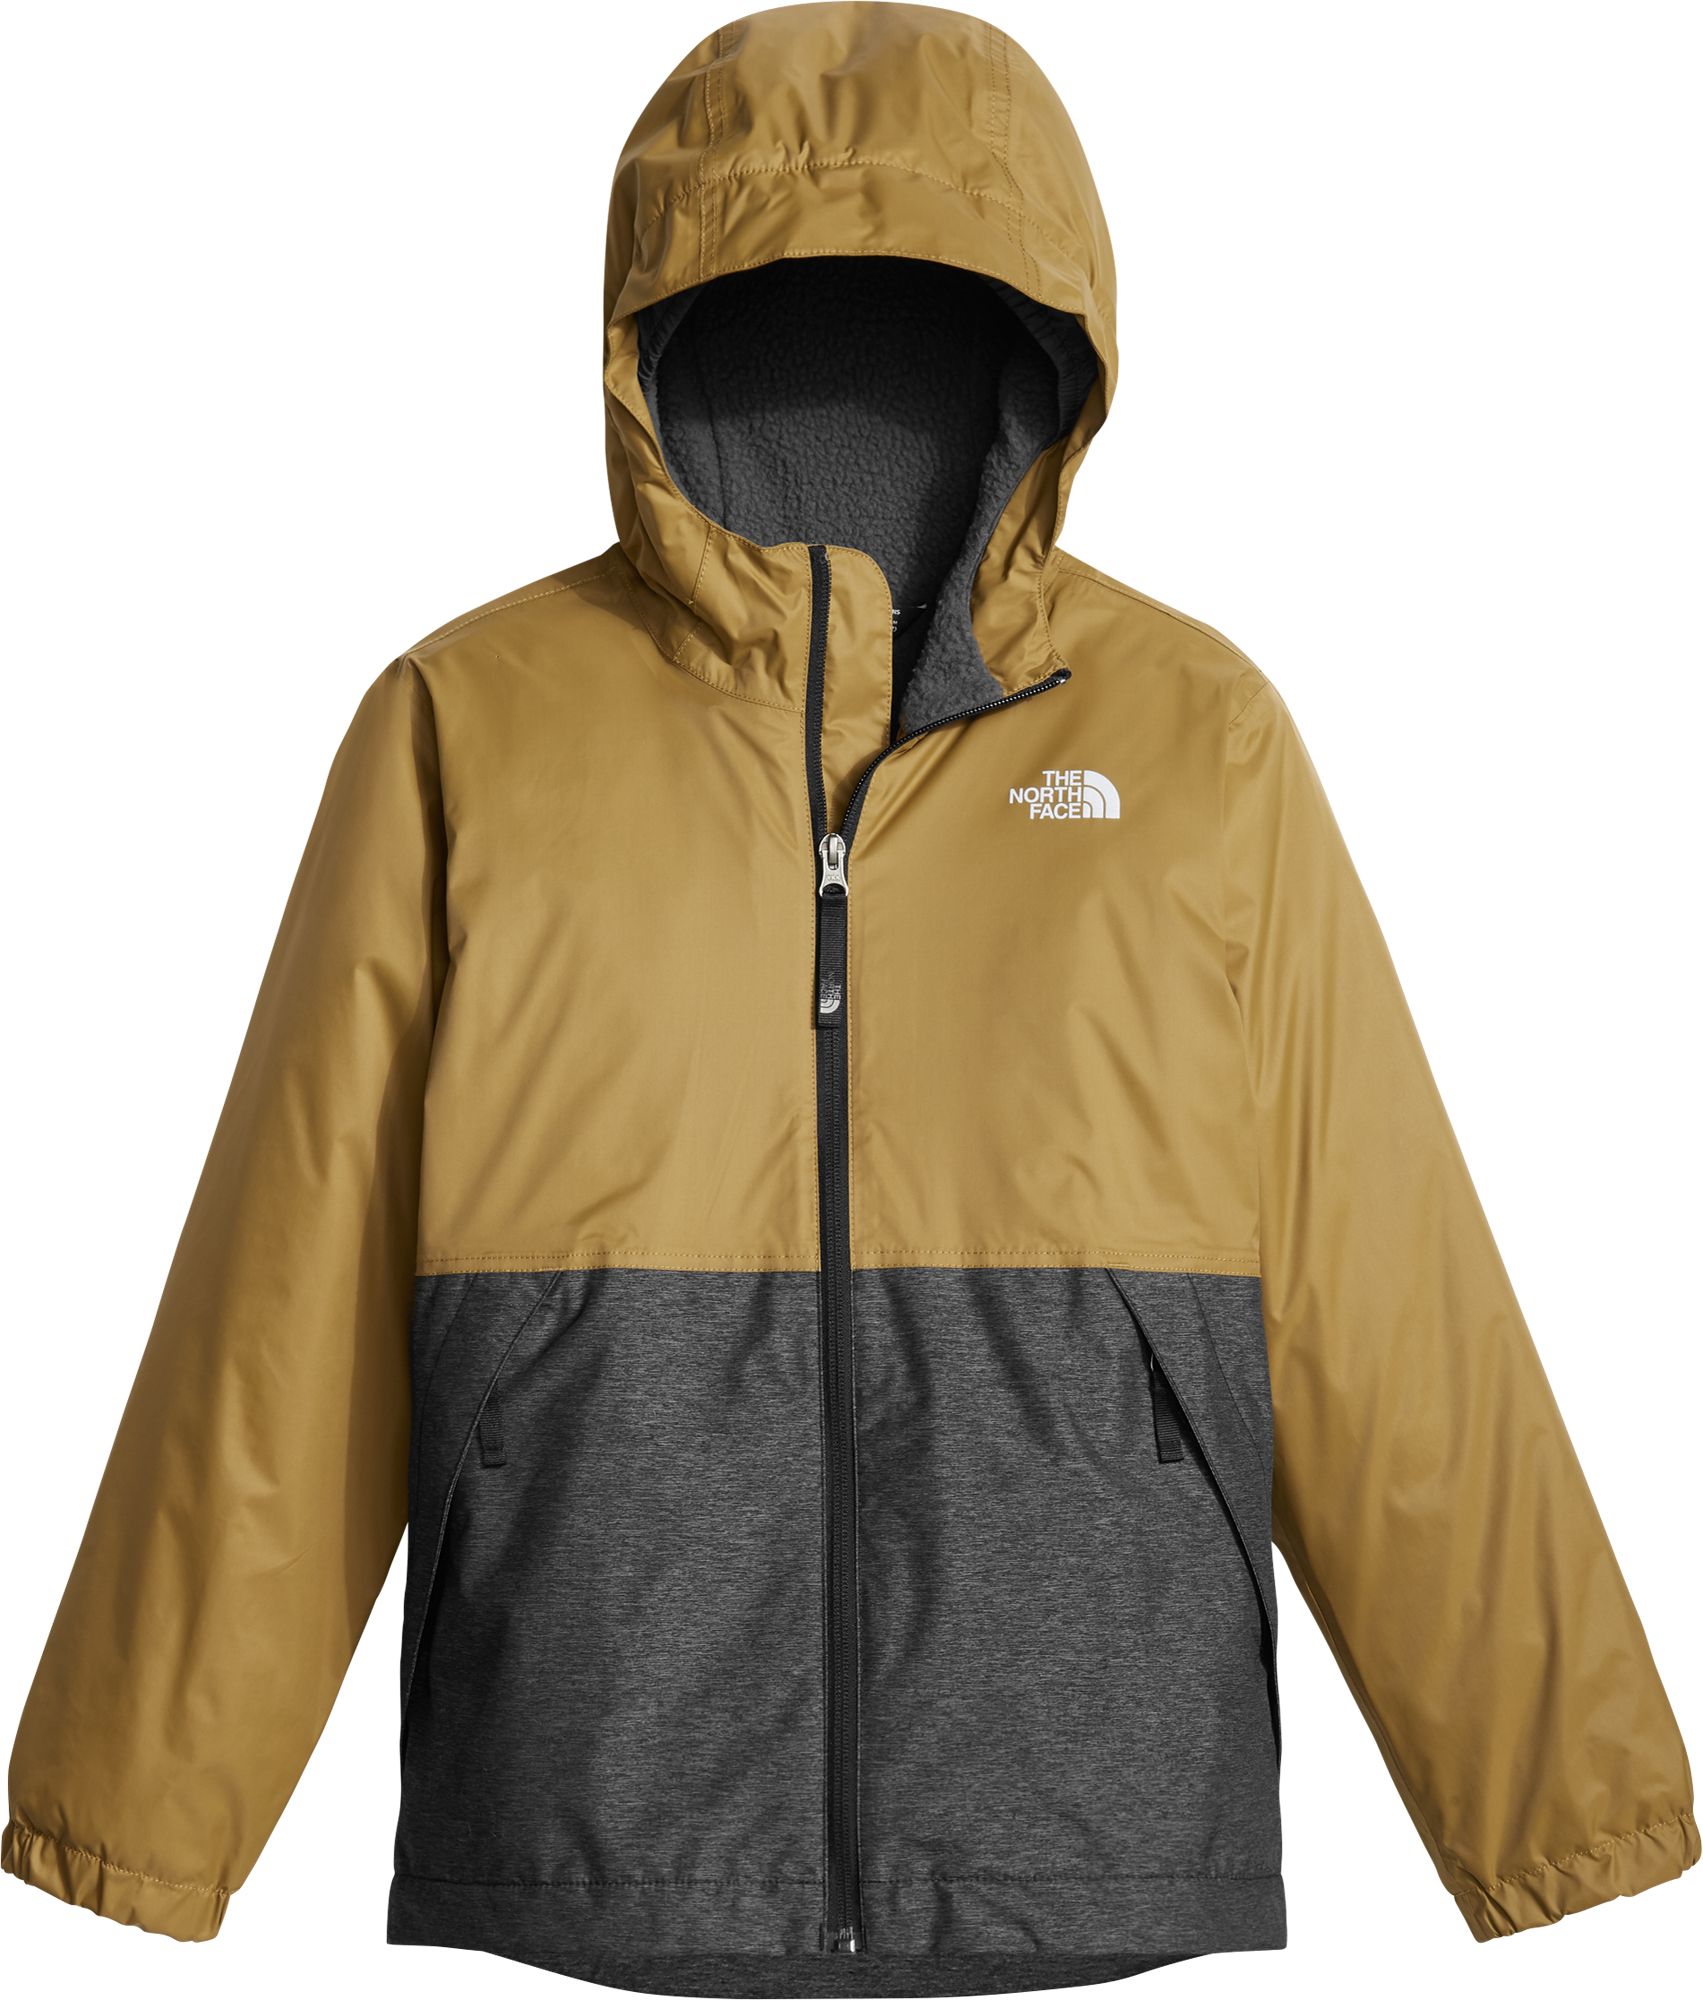 north face dicks sporting goods